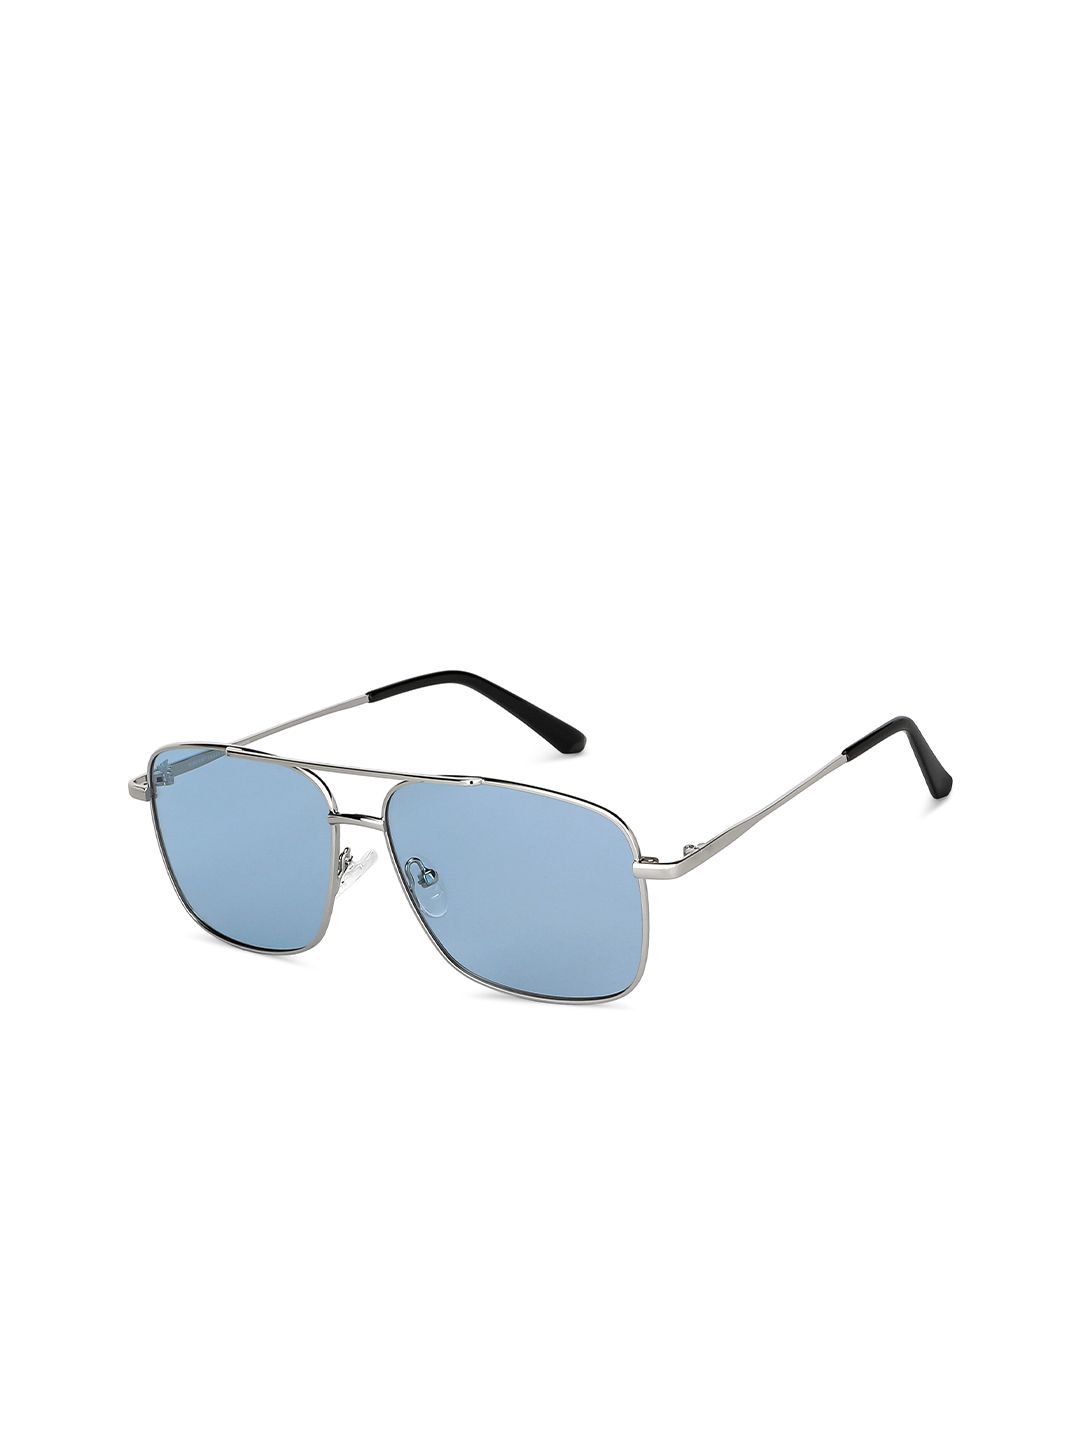 Vincent Chase Unisex Blue Lens & Silver-Toned Square Sunglasses with Polarised Lens